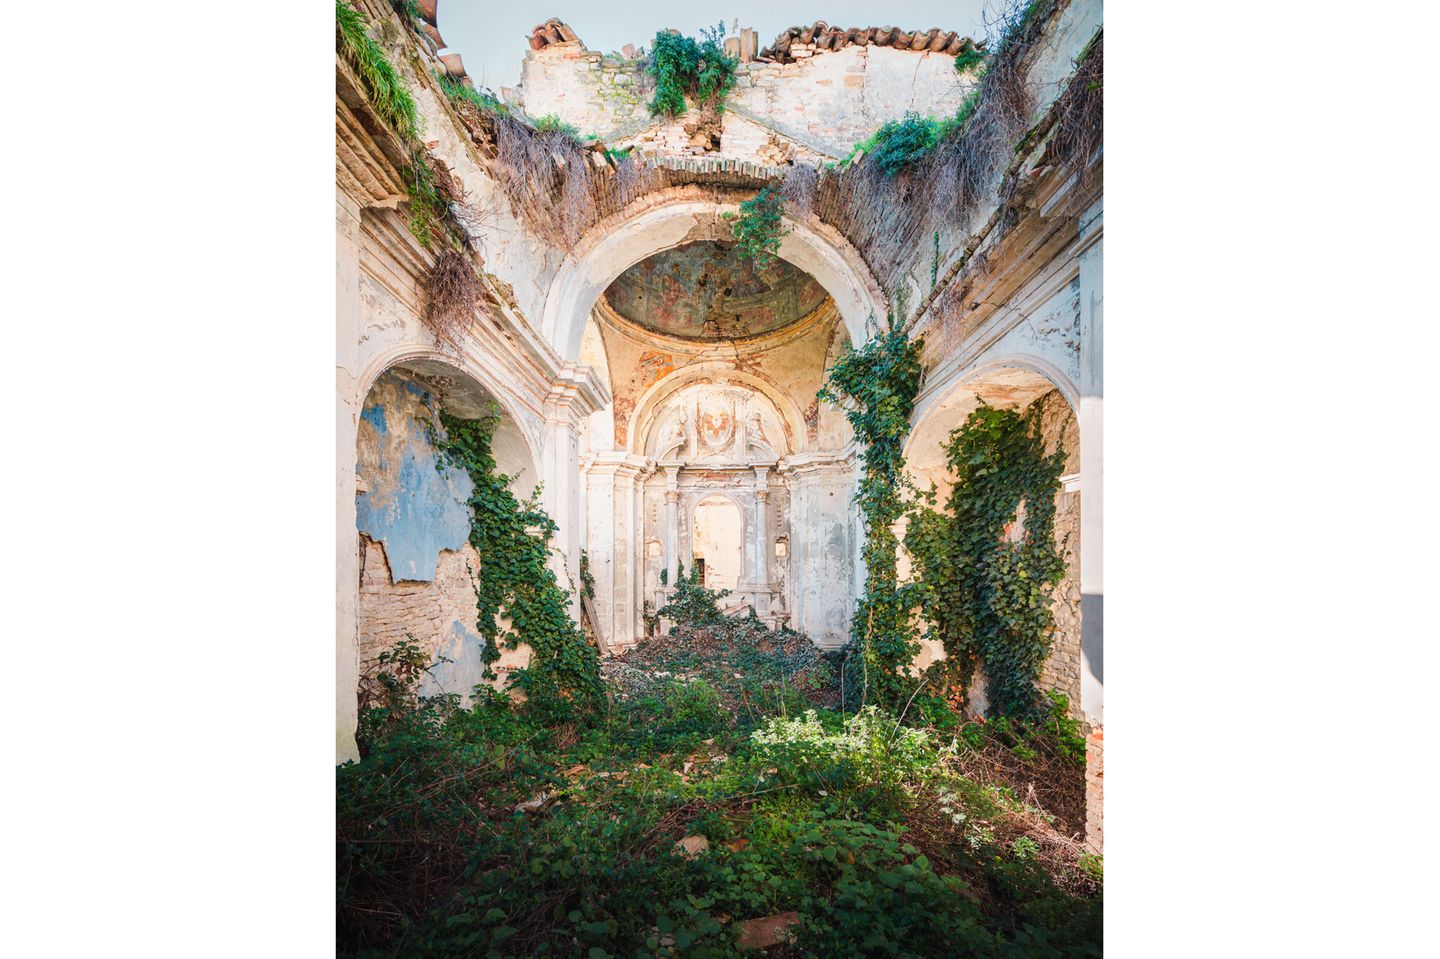 Photo 5: Located in the Abruzzo region, and damaged by an earthquake. The church has been long abandoned, and is being taken over by nature as you can clearly see in the photo.